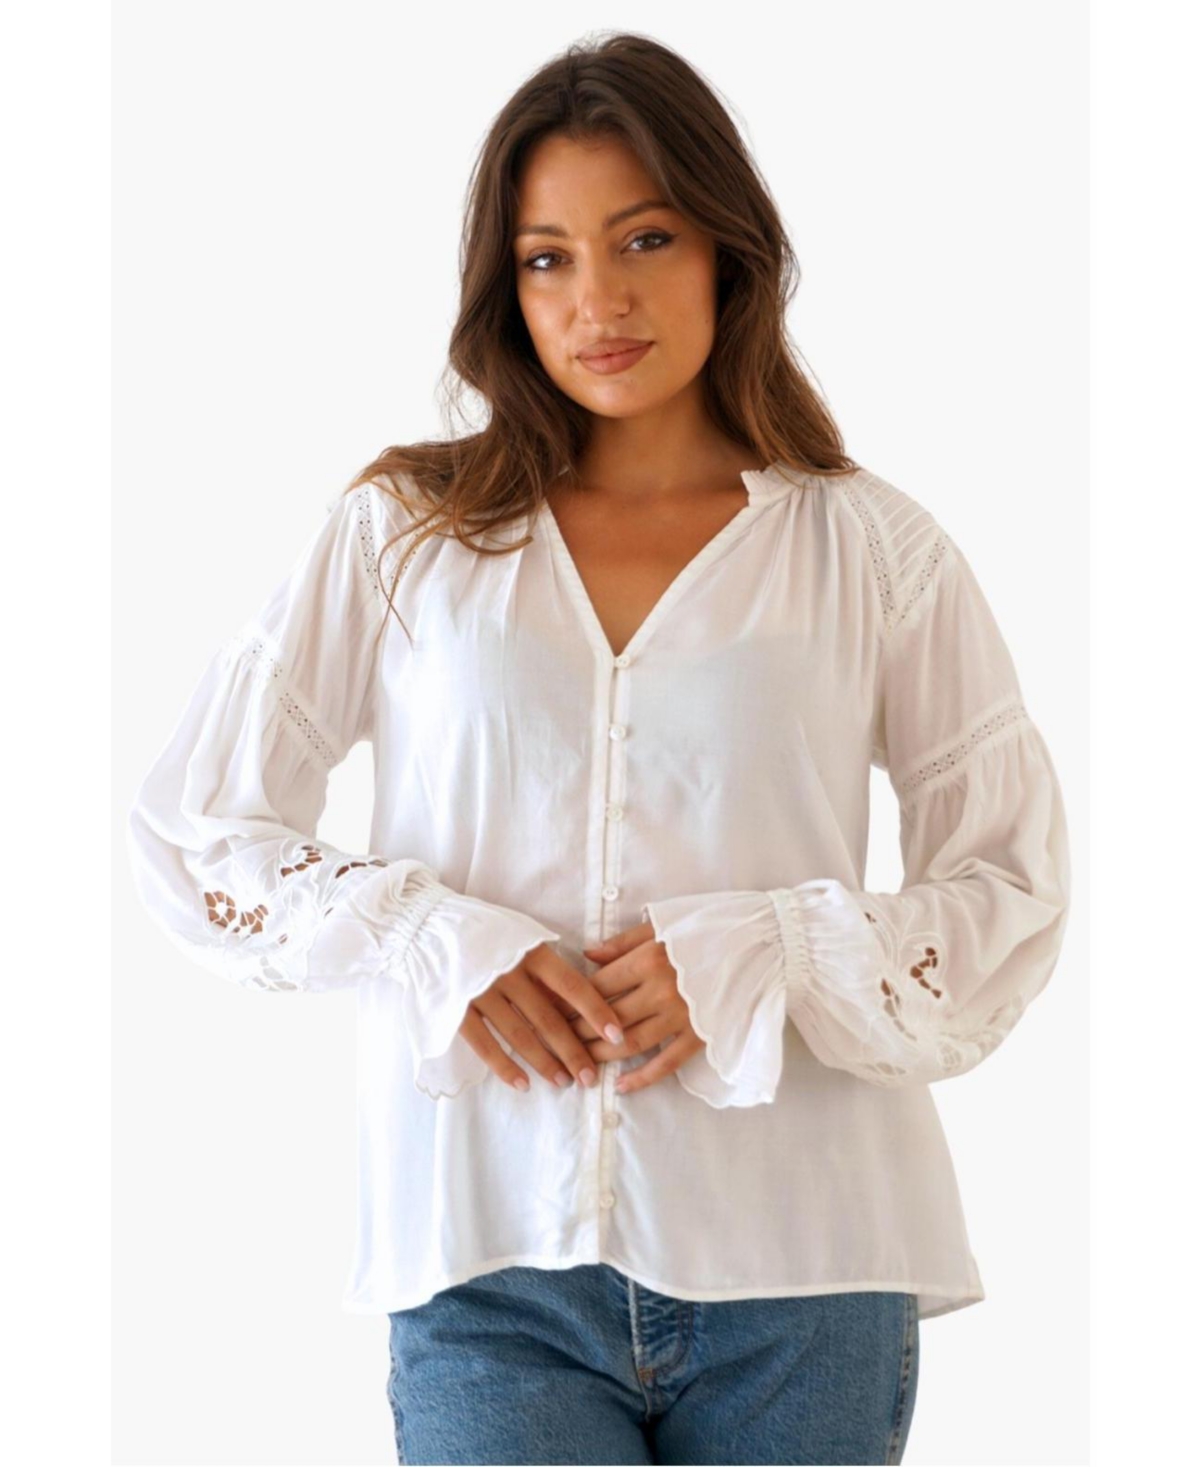 Women's Long Sleeve Embroidered Stevie Blouse - Off white